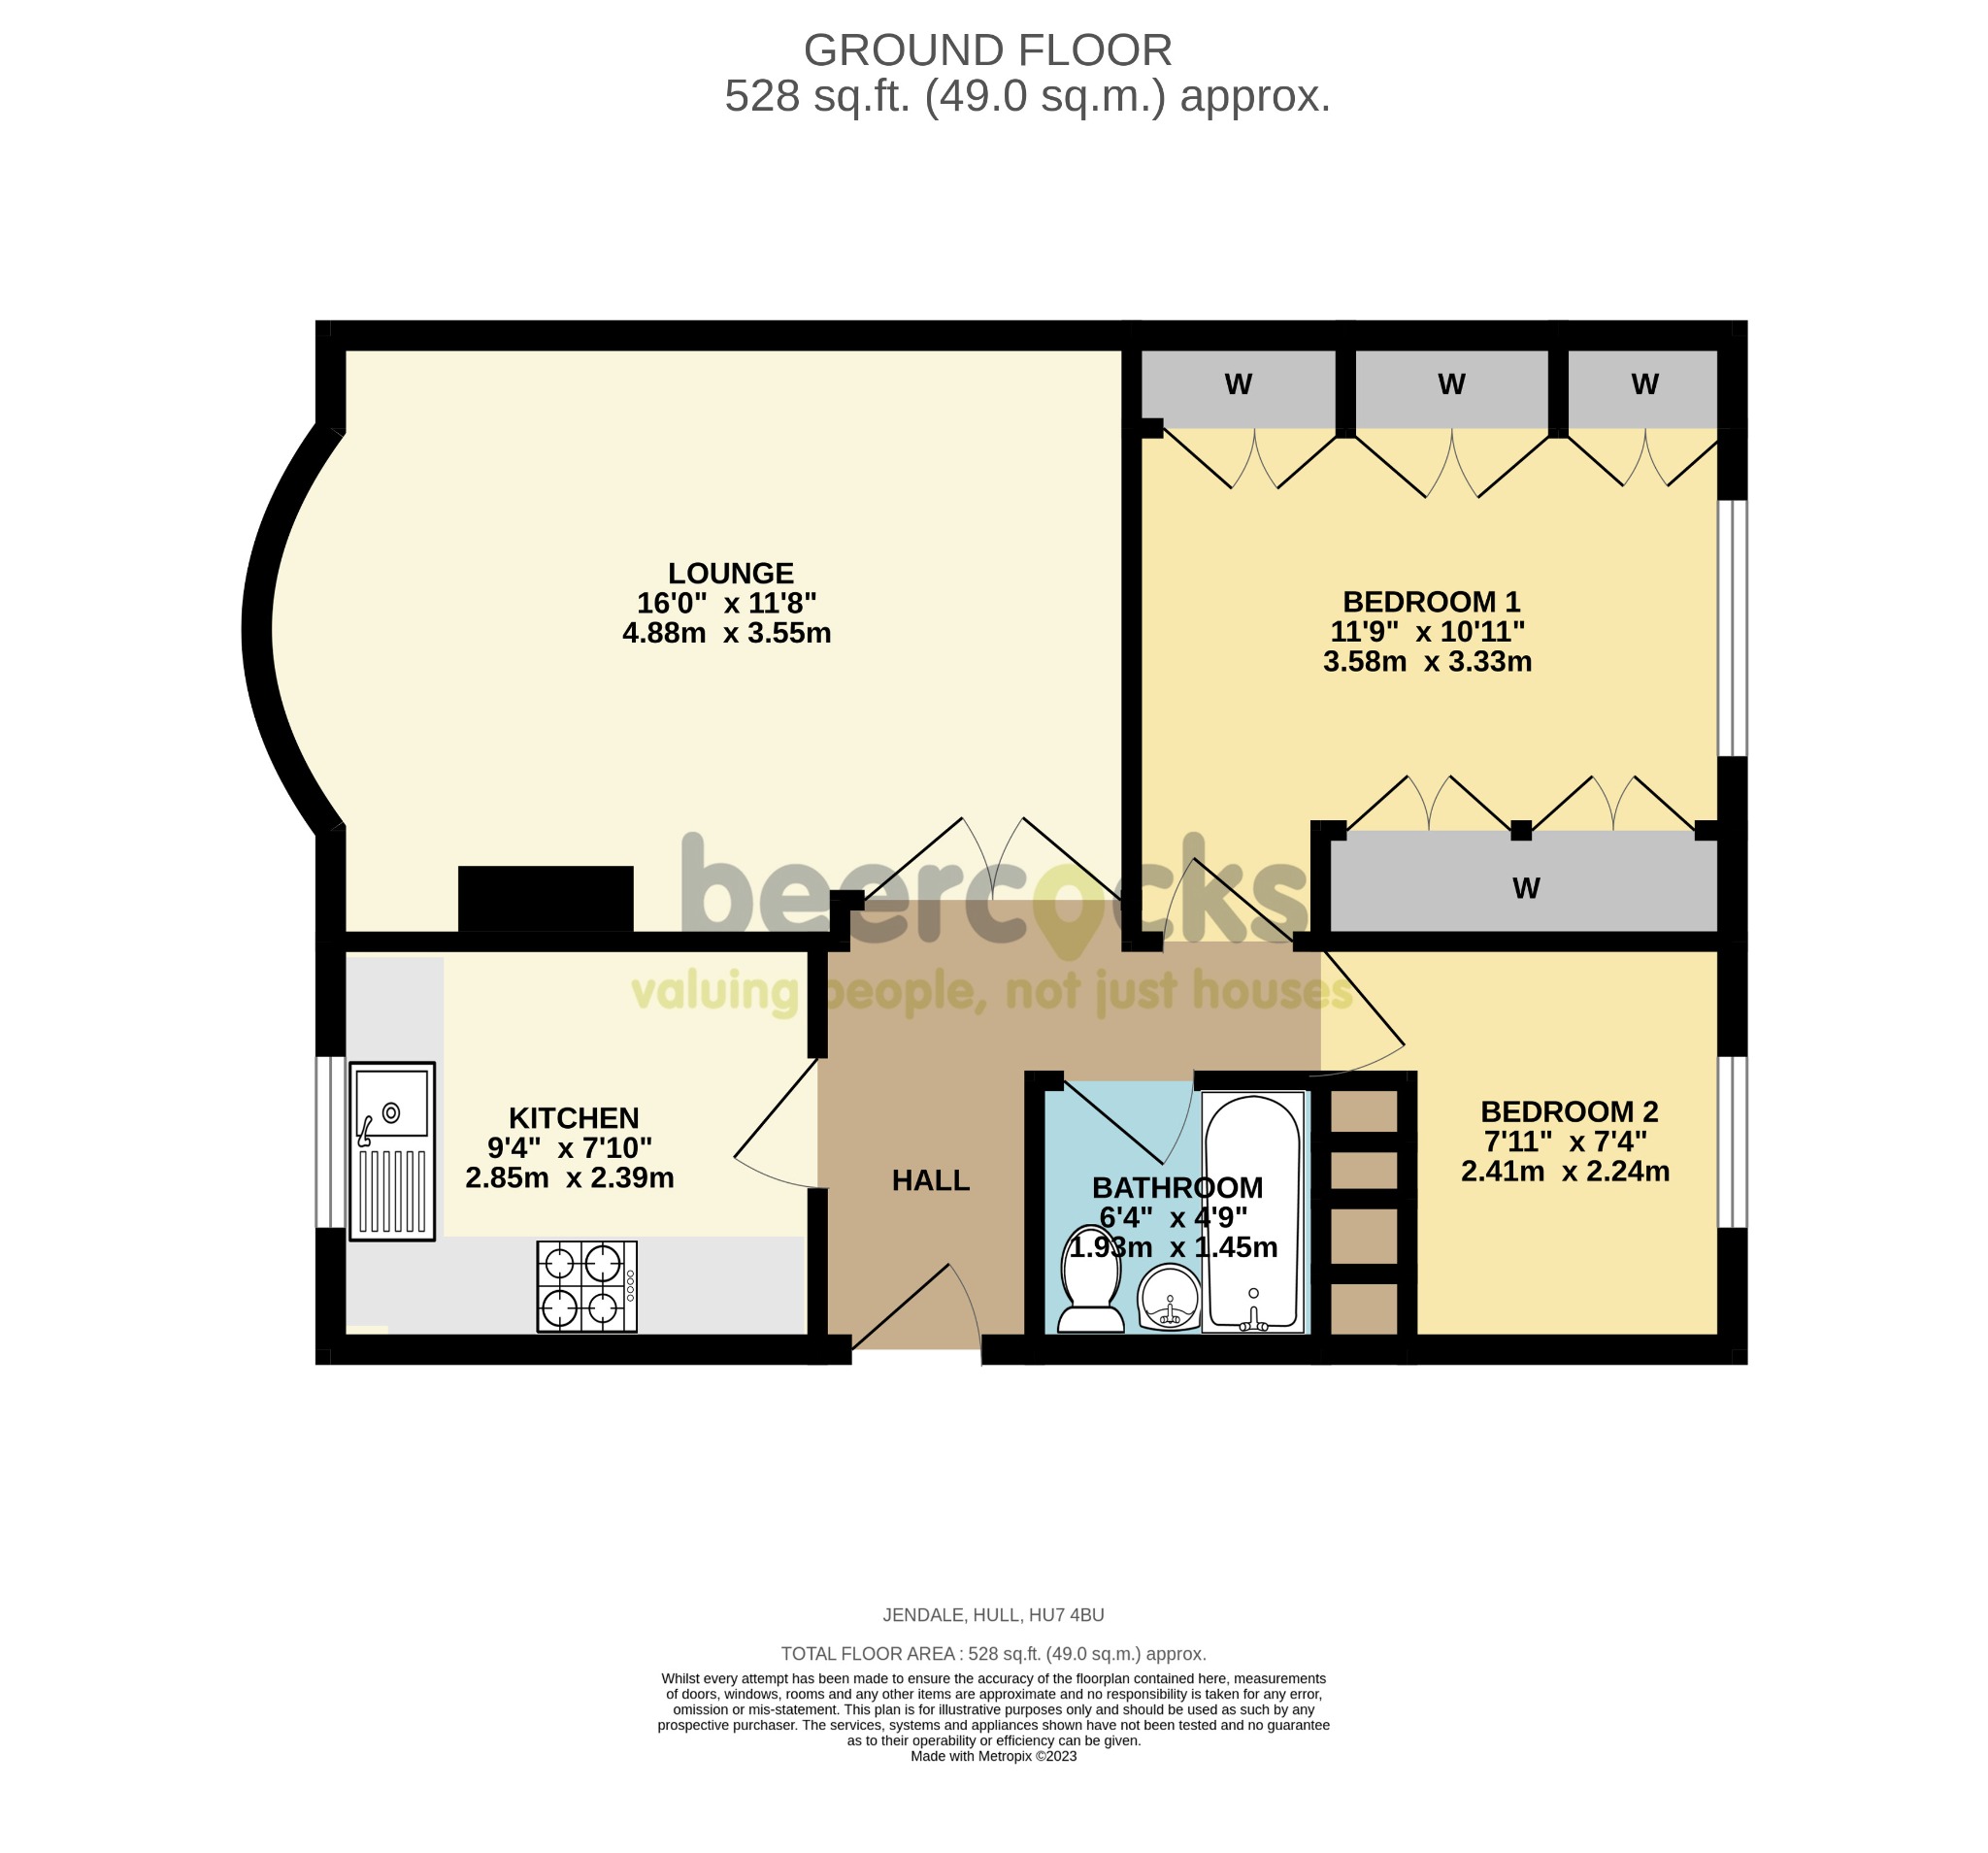 2 bed semi-detached bungalow for sale in Jendale, Hull - Property Floorplan